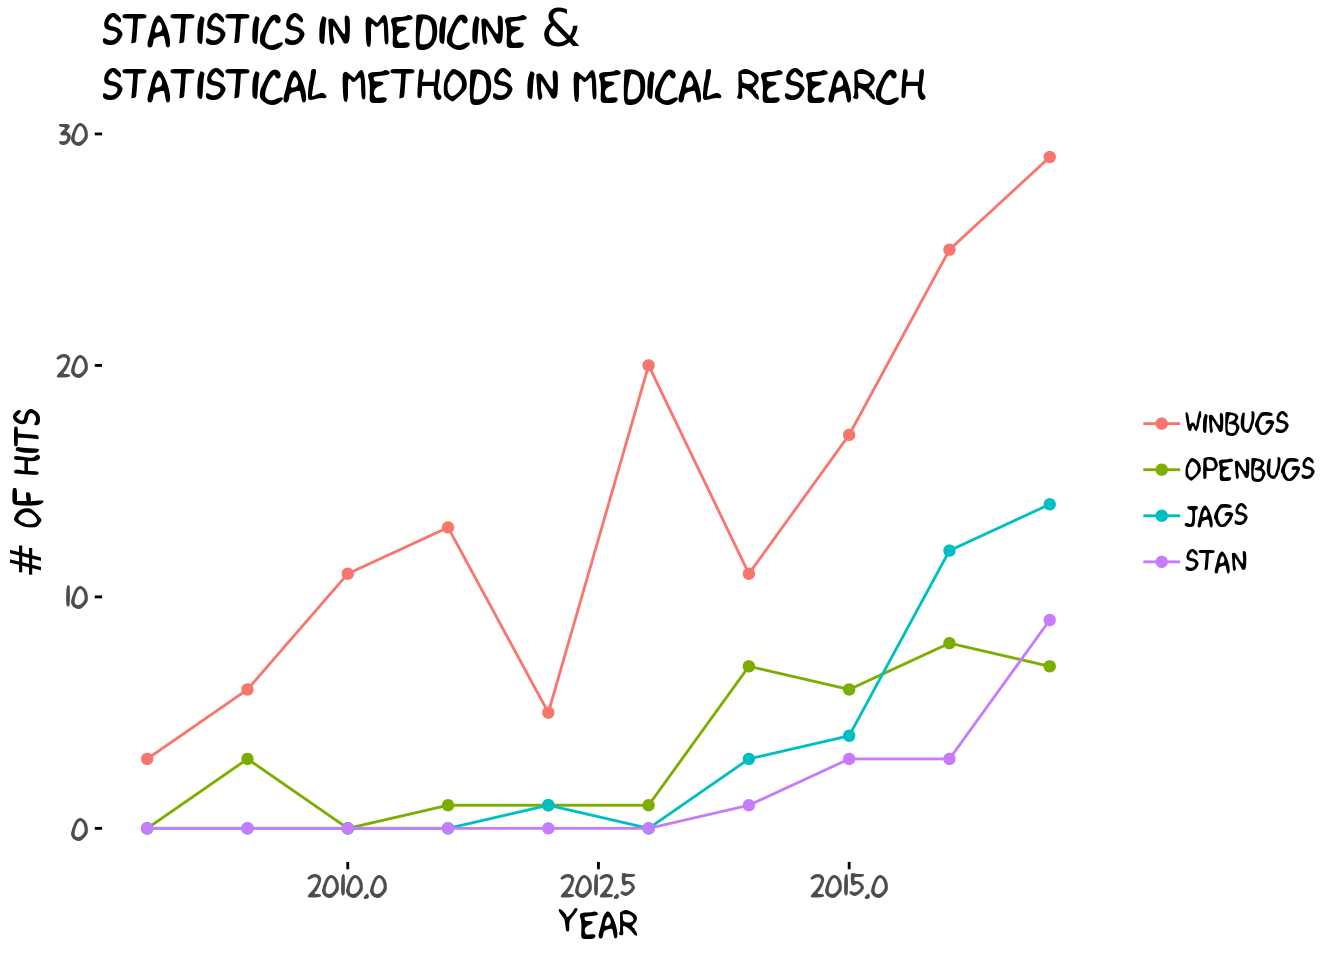 Scholarly Bayesian papers within Statistics in Medicine and Statistical Methods in Medical Research.